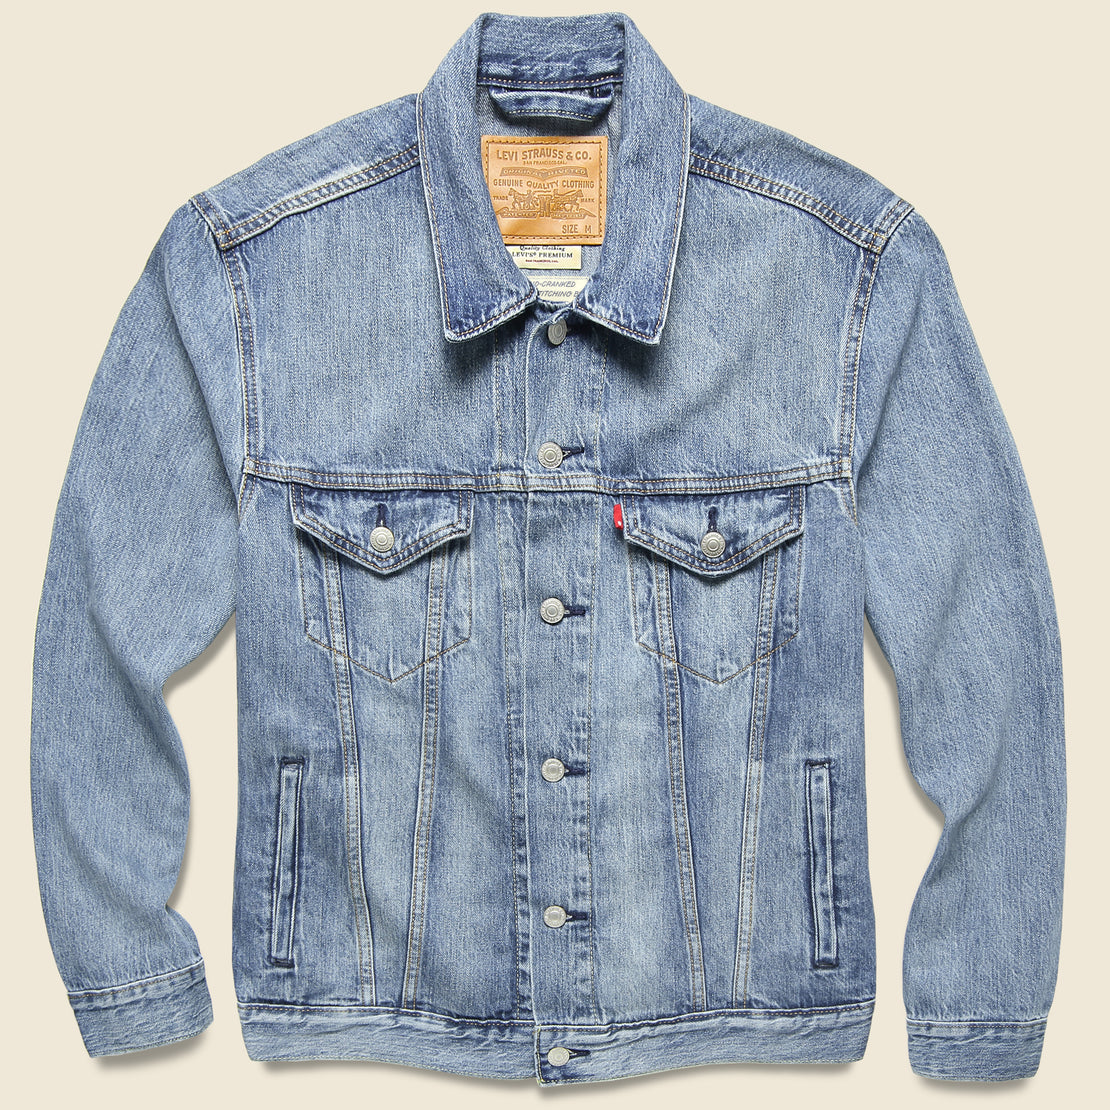 Killebrew Trucker Jacket - New York Cactus - Fort Lonesome - STAG Provisions - Outerwear - Coat / Jacket